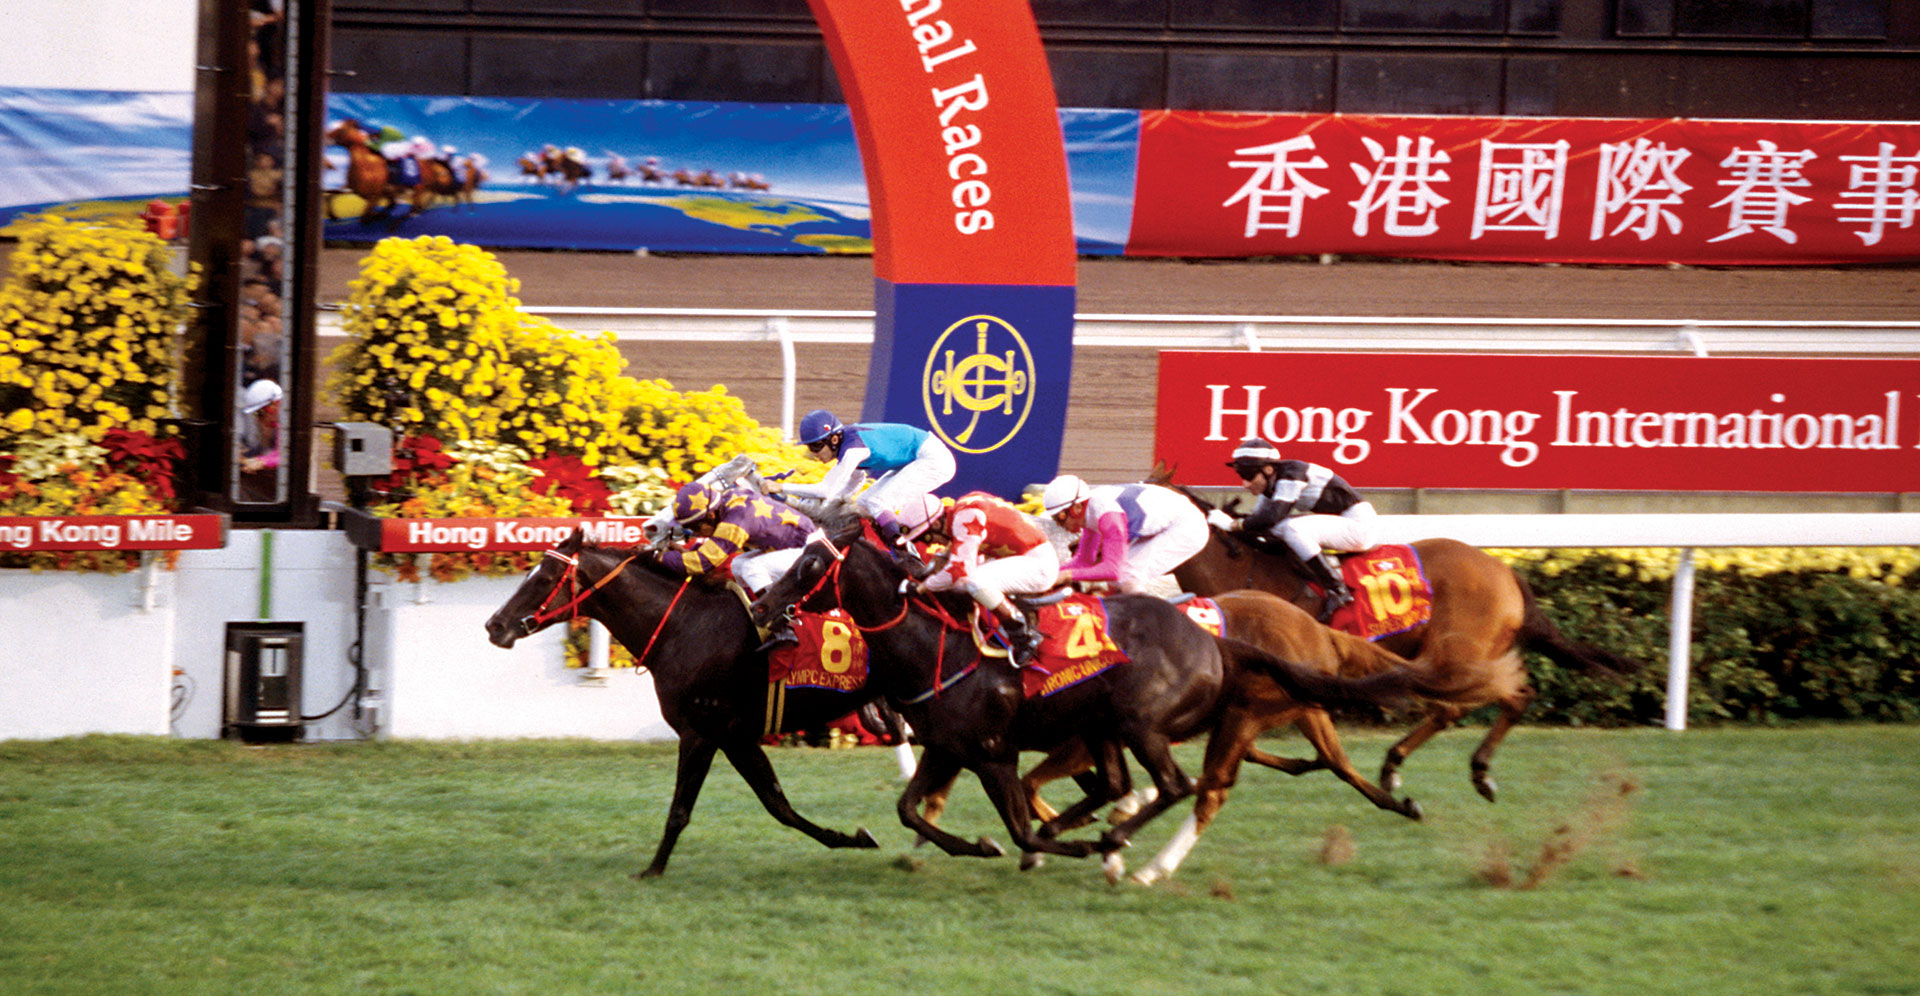 In 2002, all four Hong Kong International Races are granted Group 1 status and are recognised as the Turf World Championships.